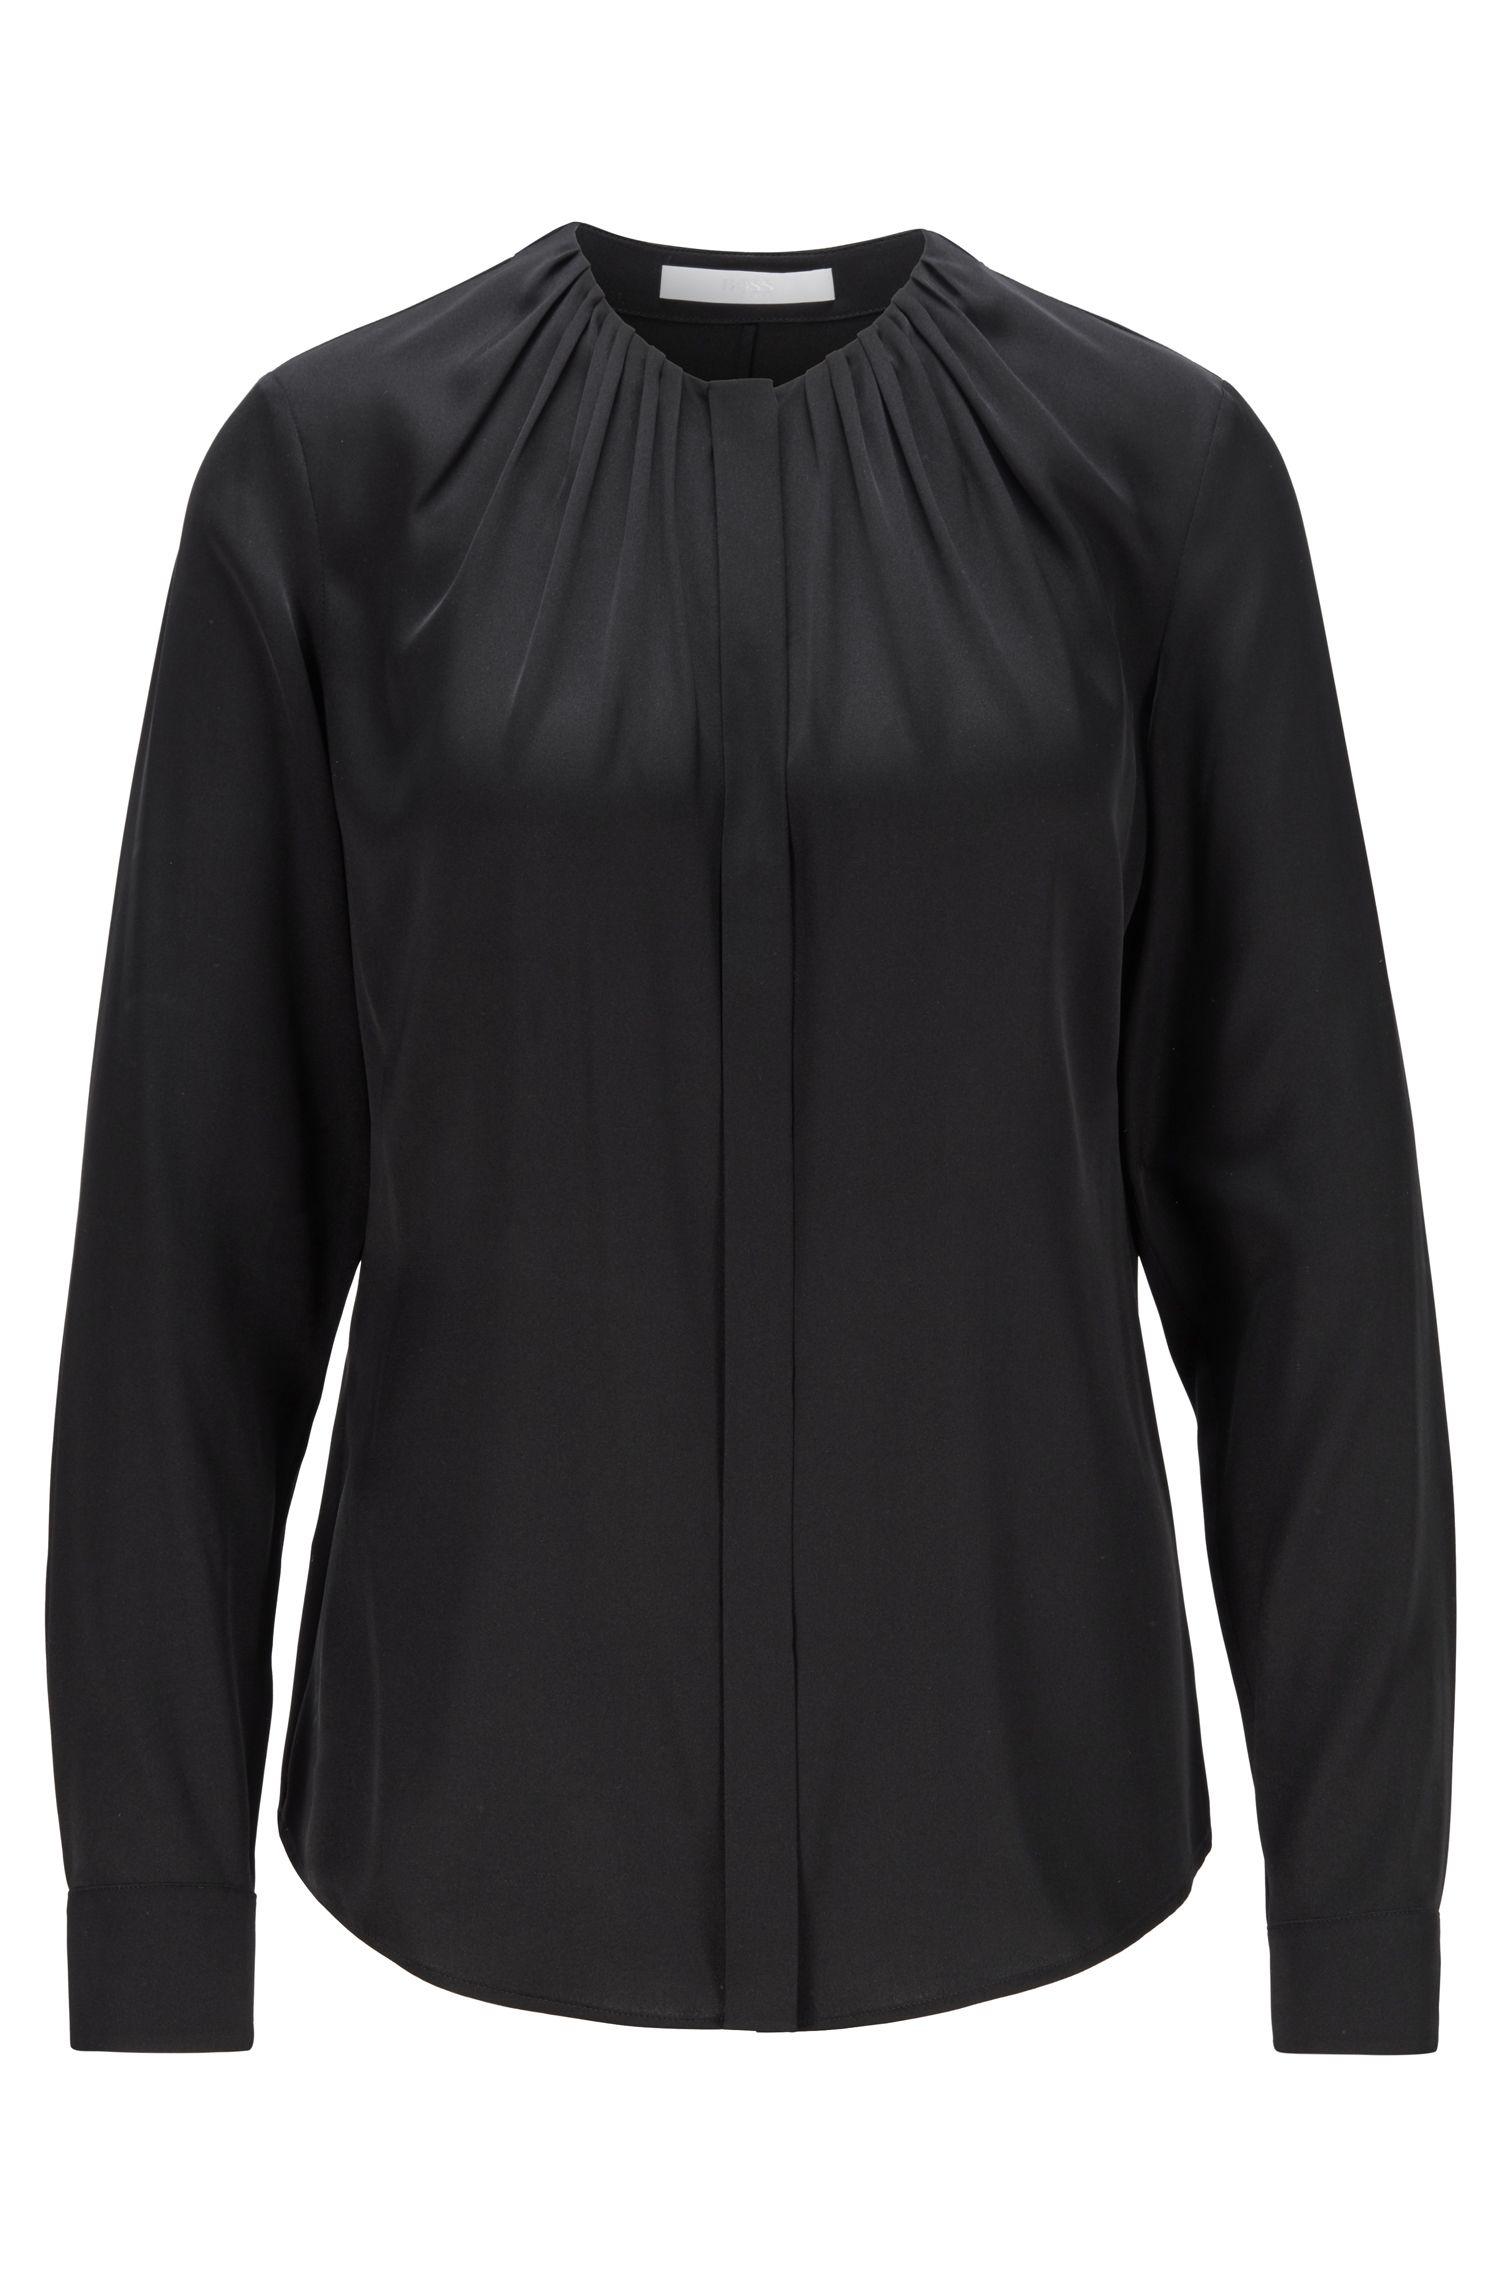 BOSS by Hugo Boss Silk Blend Blouse With Gathered Neckline in Black - Lyst